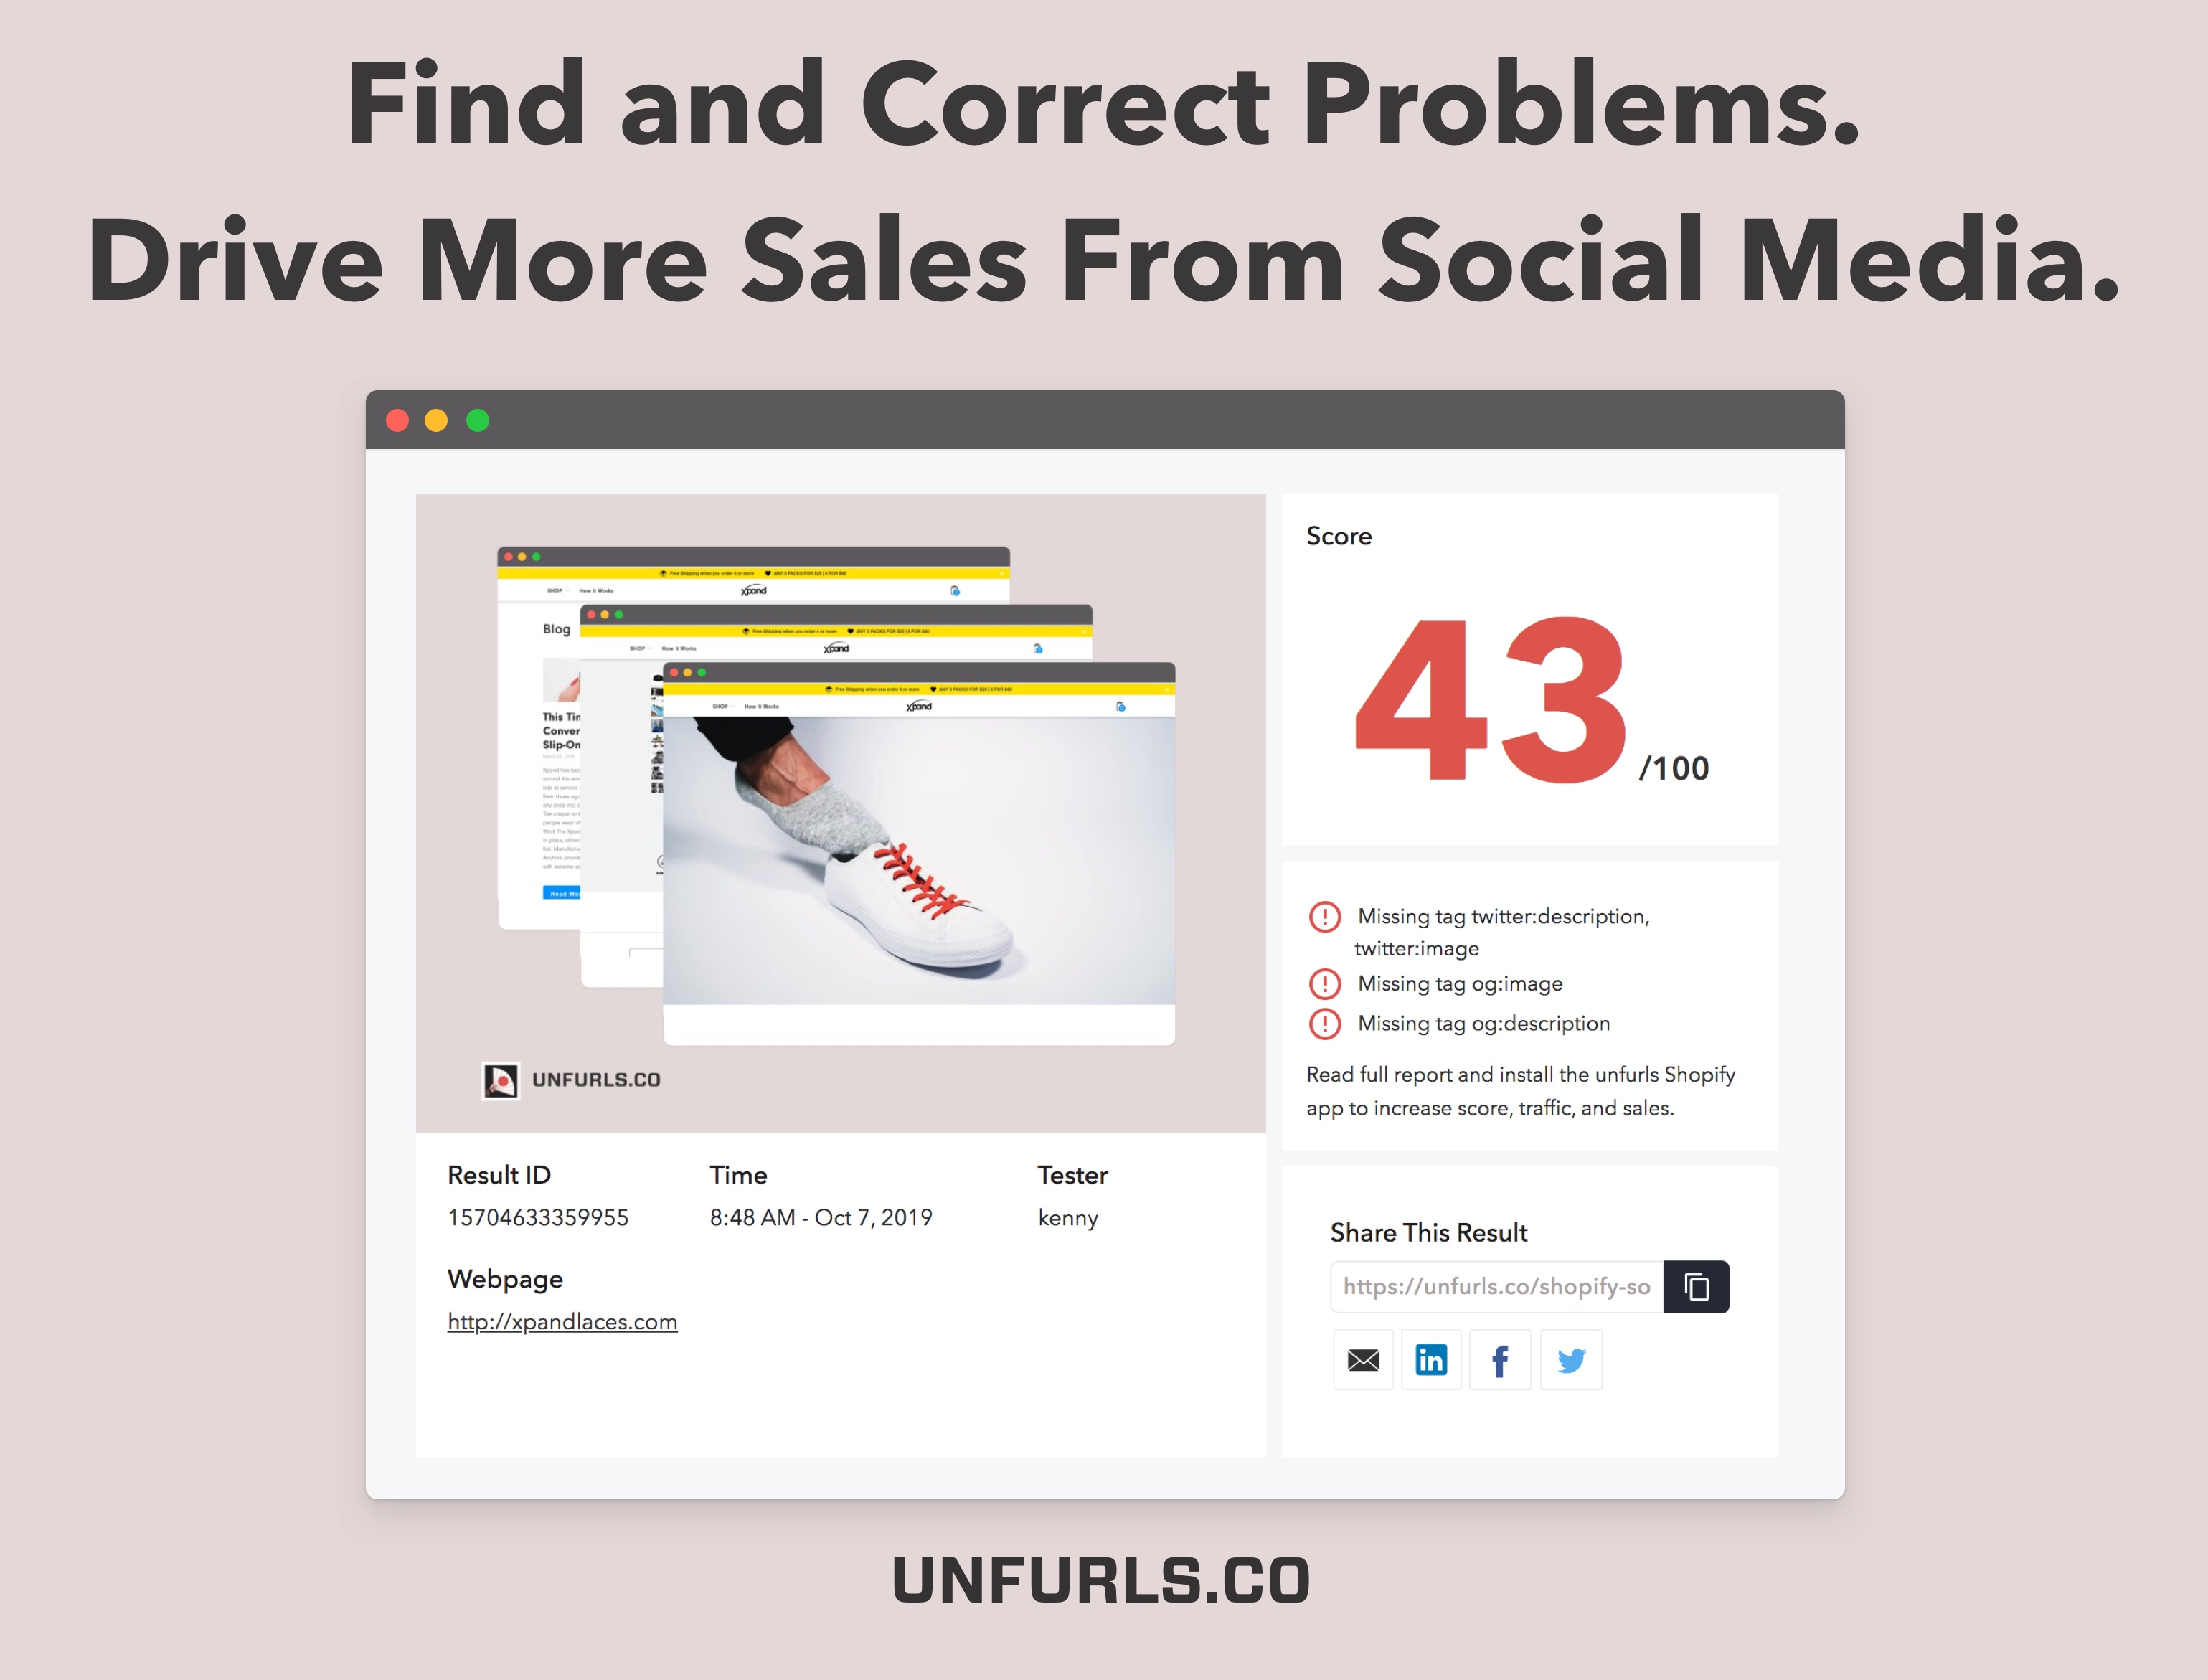 Find and correct problems. Drive more sales from social media